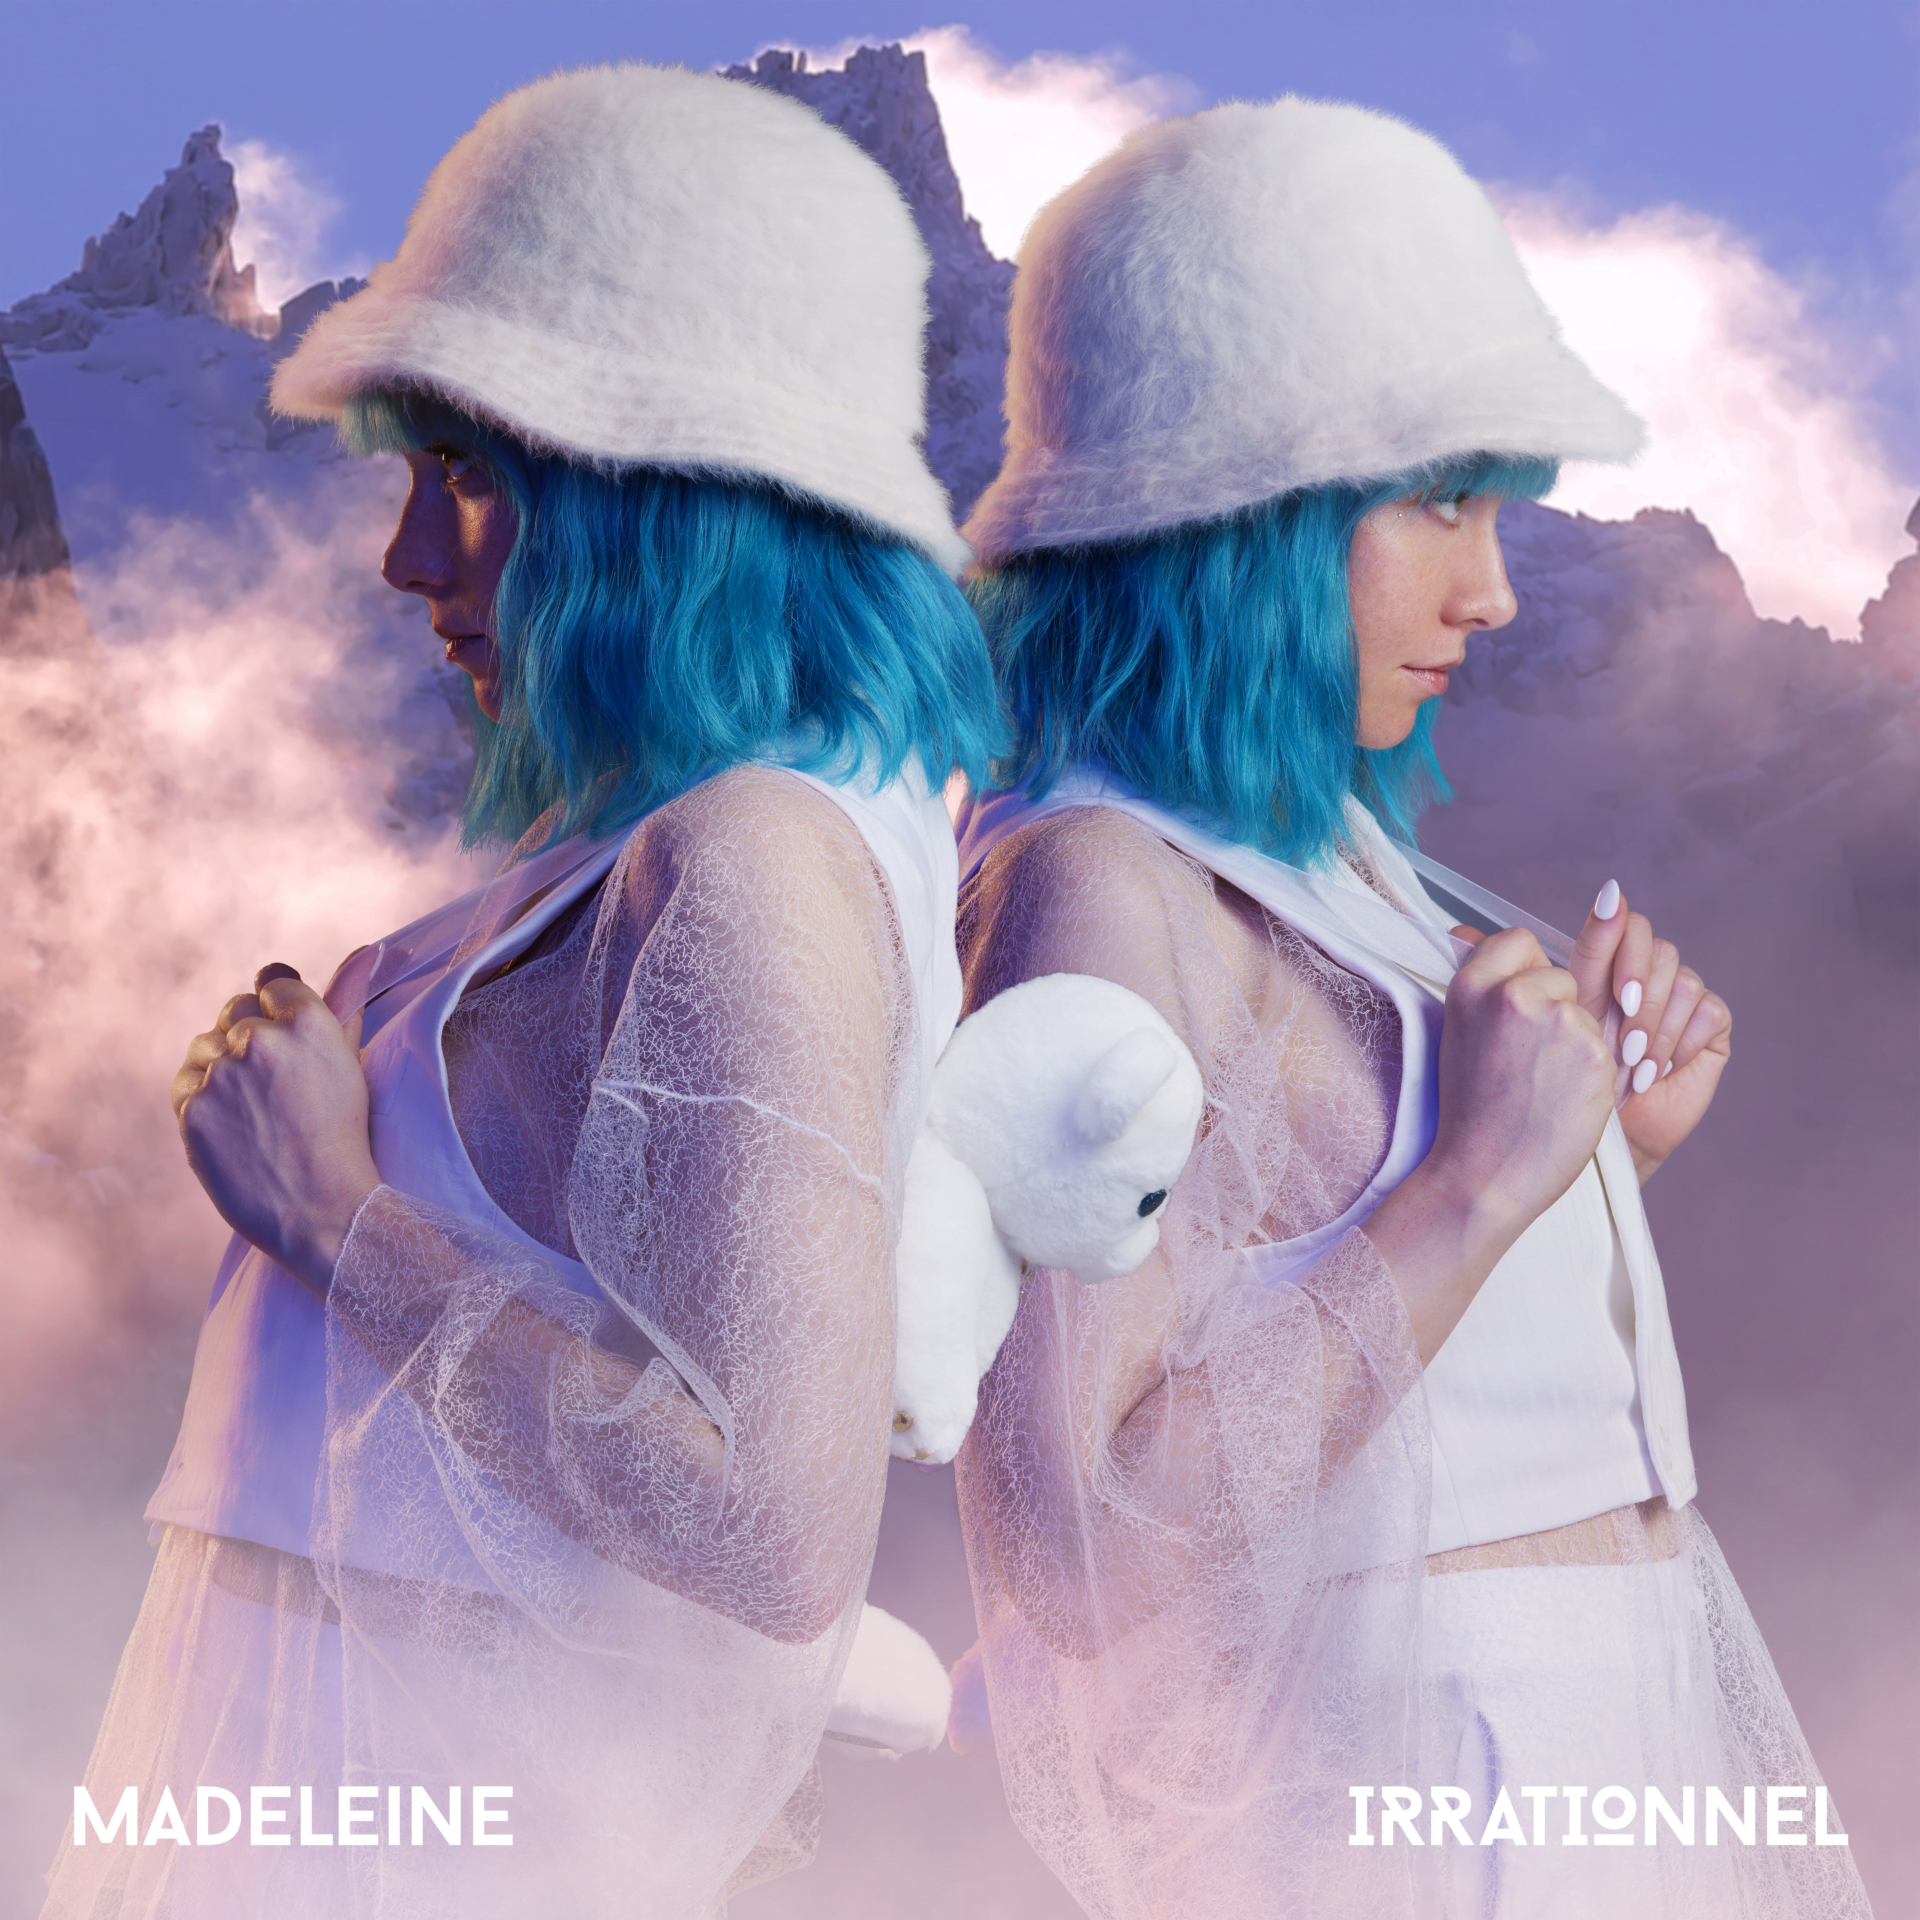 Madeleine releases catchy new song 'Irrationnel'